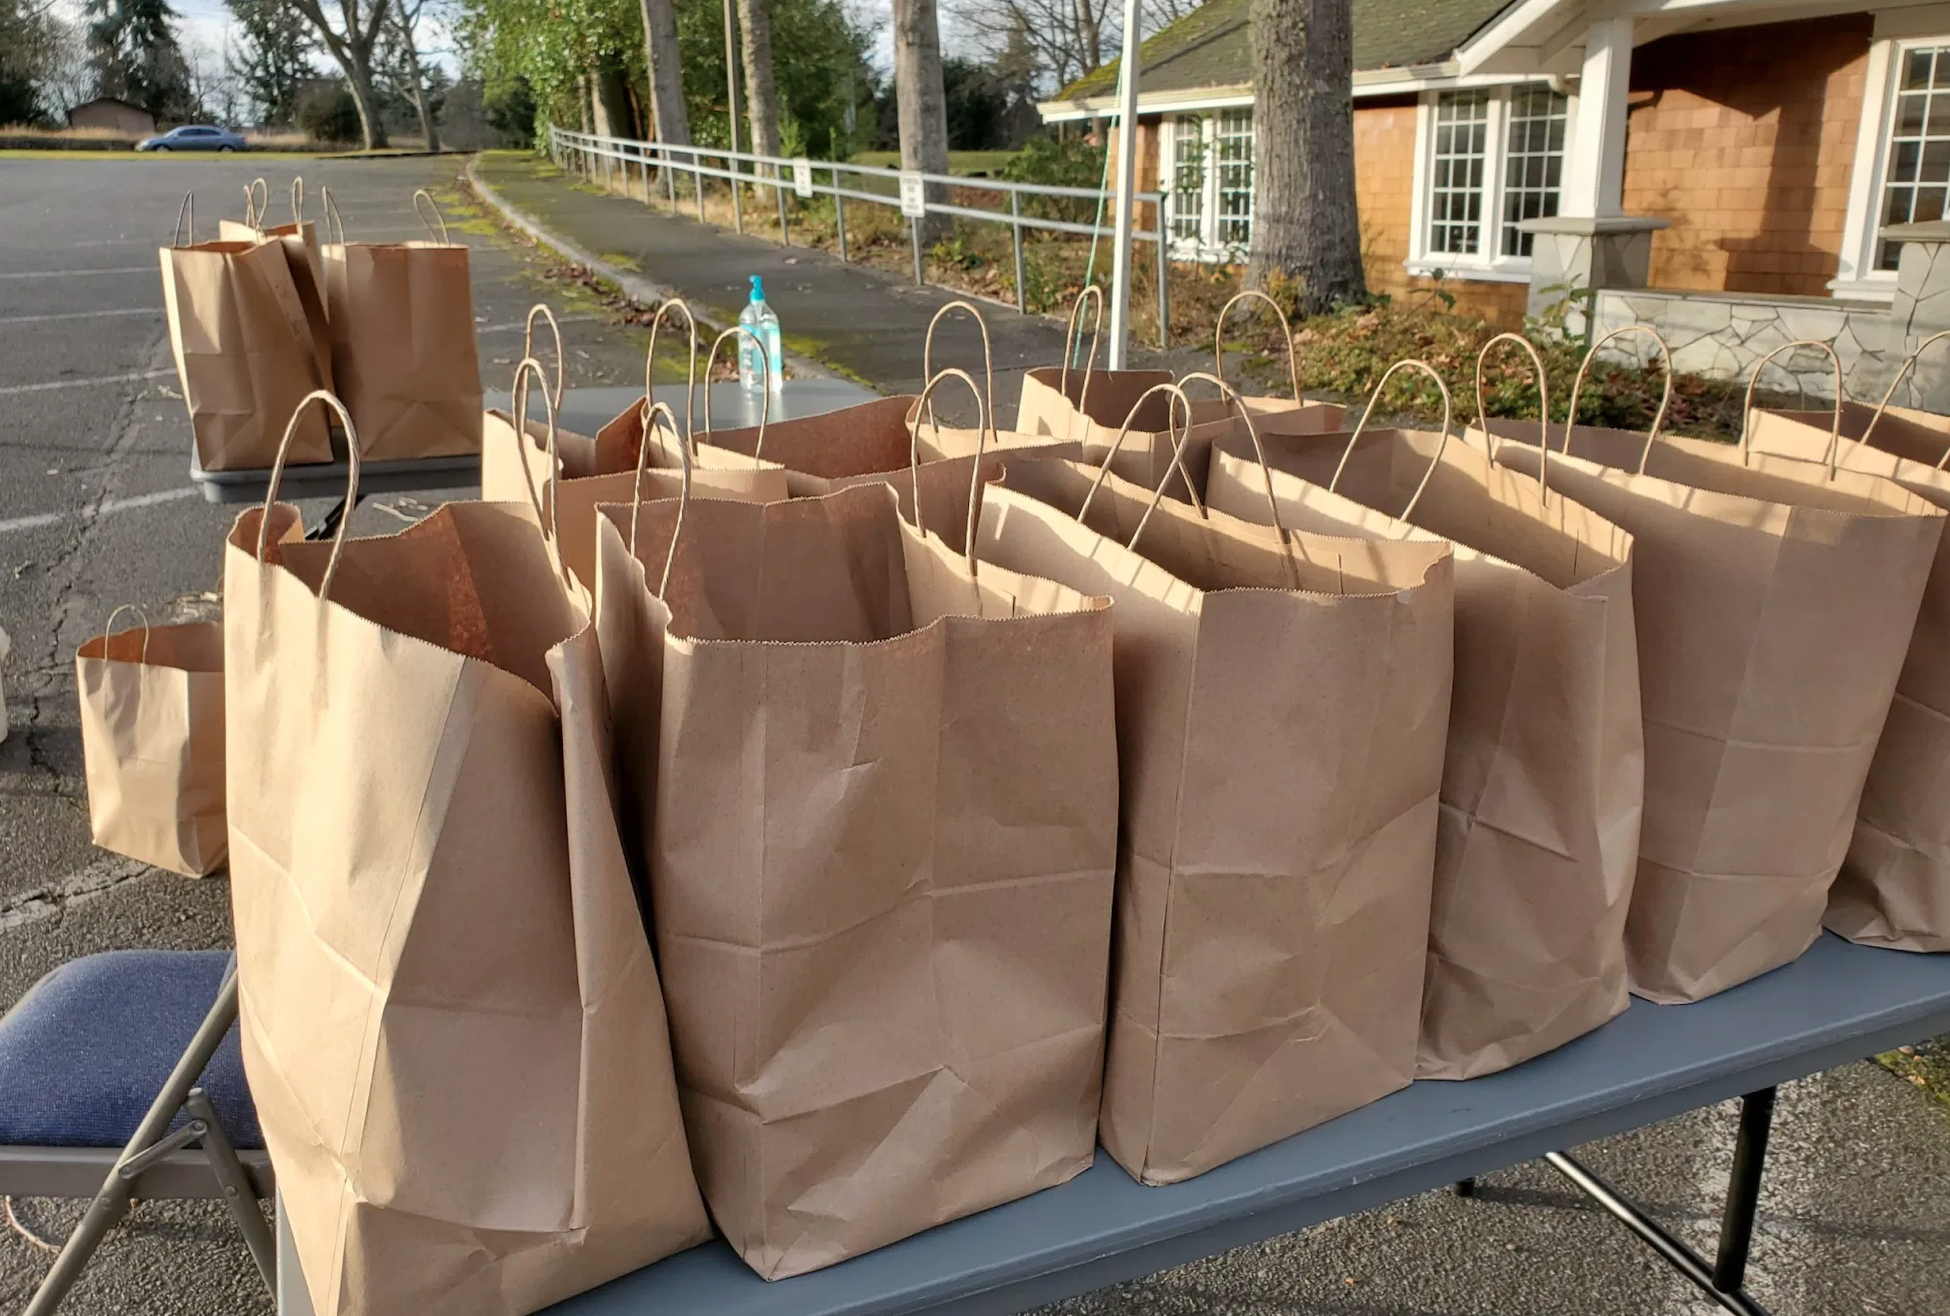 Bags of food to be donated to students